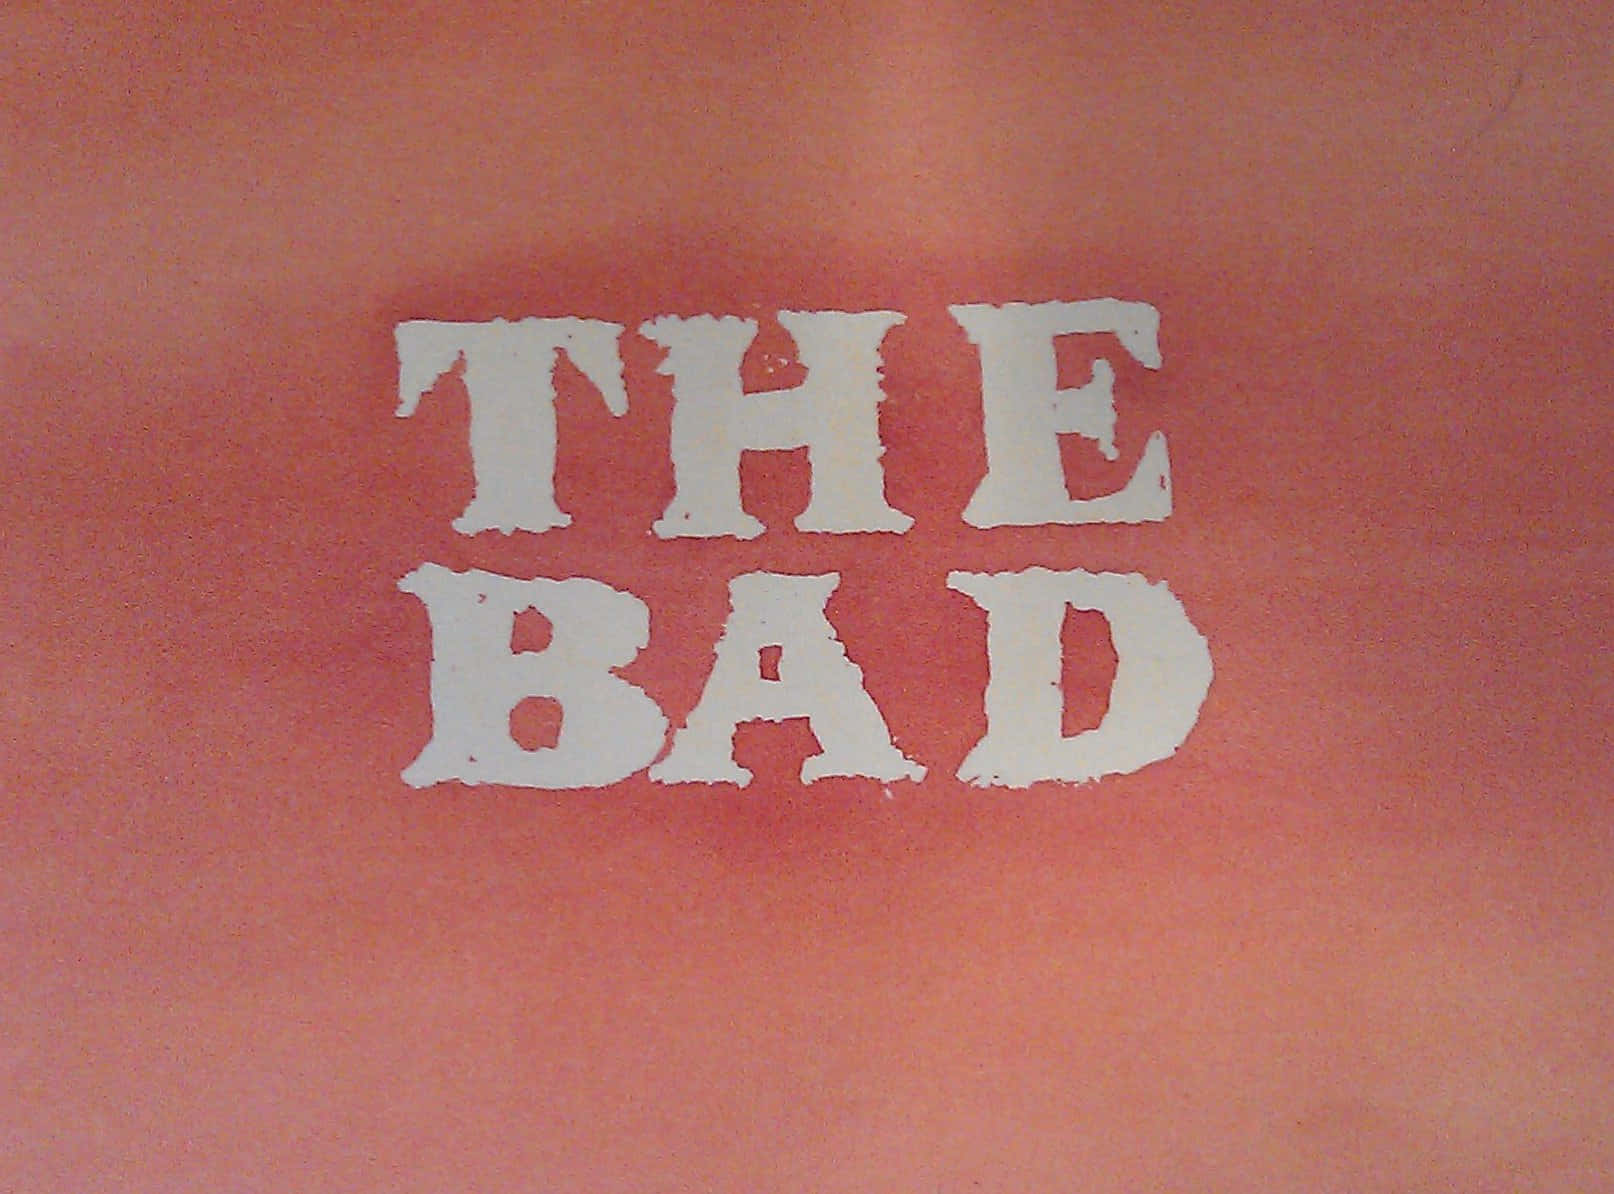 The Bad - A Poster